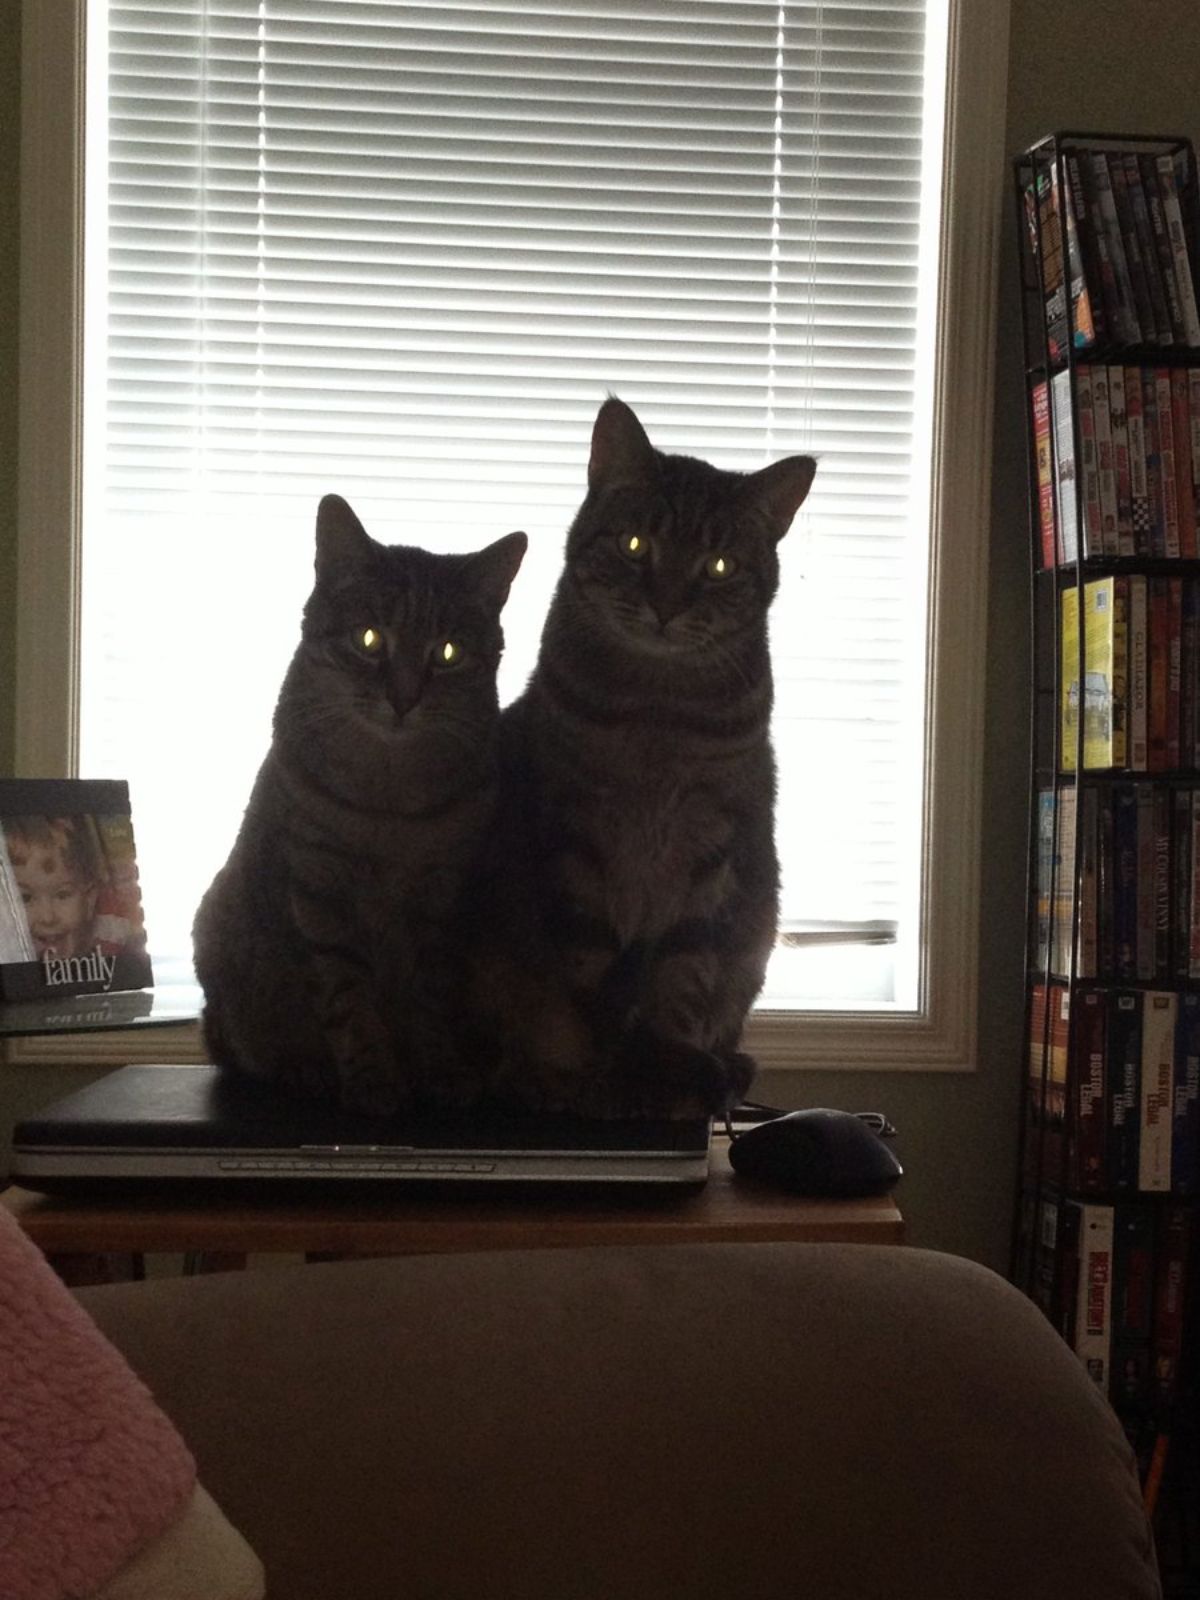 2 grey tabby cats sitting on a laptop on a table and staring with yellow eyes